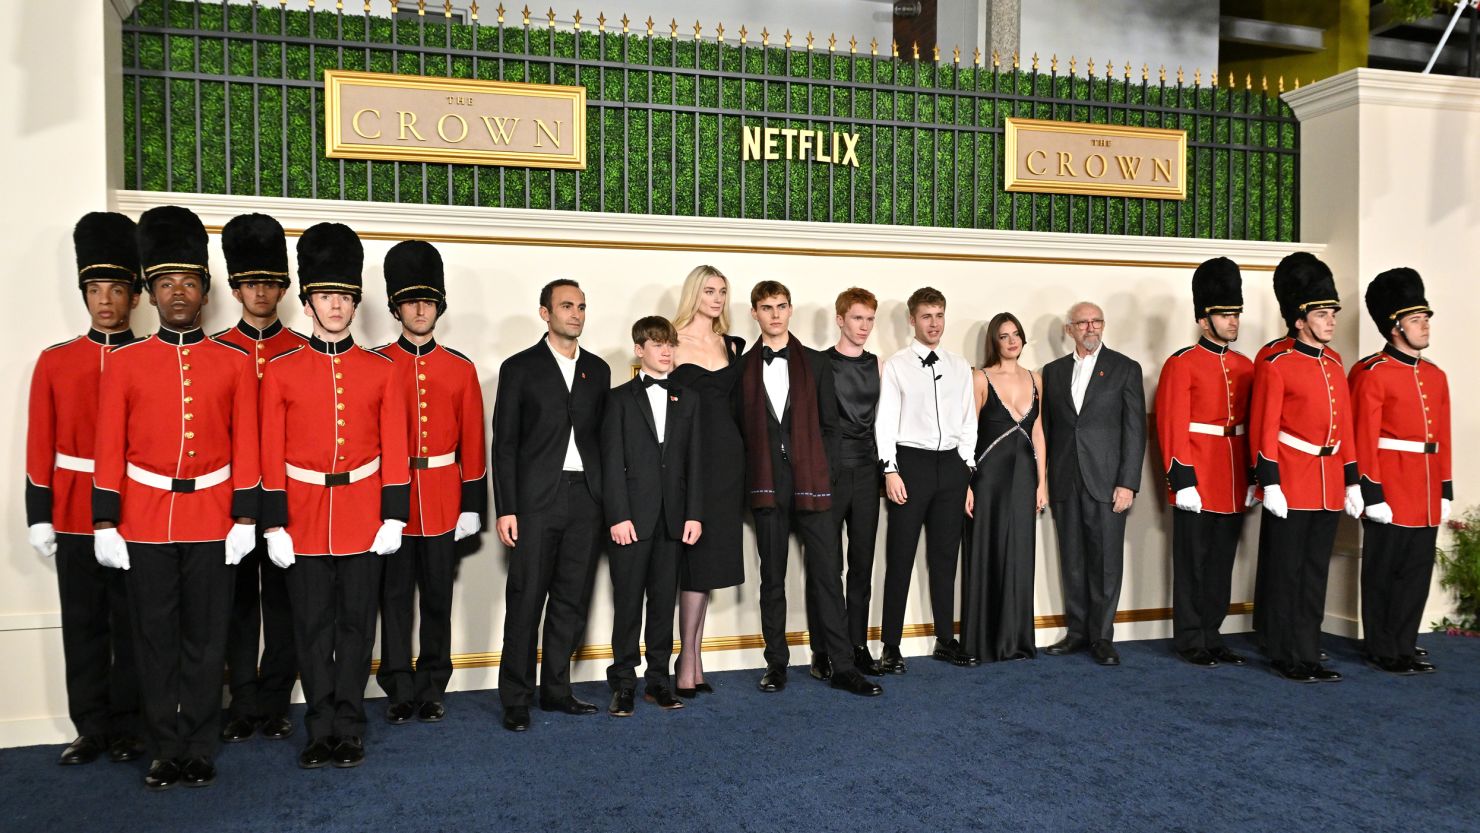 (From left) Khalid Abdalla, Fflyn Edwards, Elizabeth Debicki, Rufus Kampa, Luther Ford, Ed McVey, Meg Bellamy and Jonathan Pryce at the Los Angeles premiere of Netflix's 'The Crown' on Sunday. 